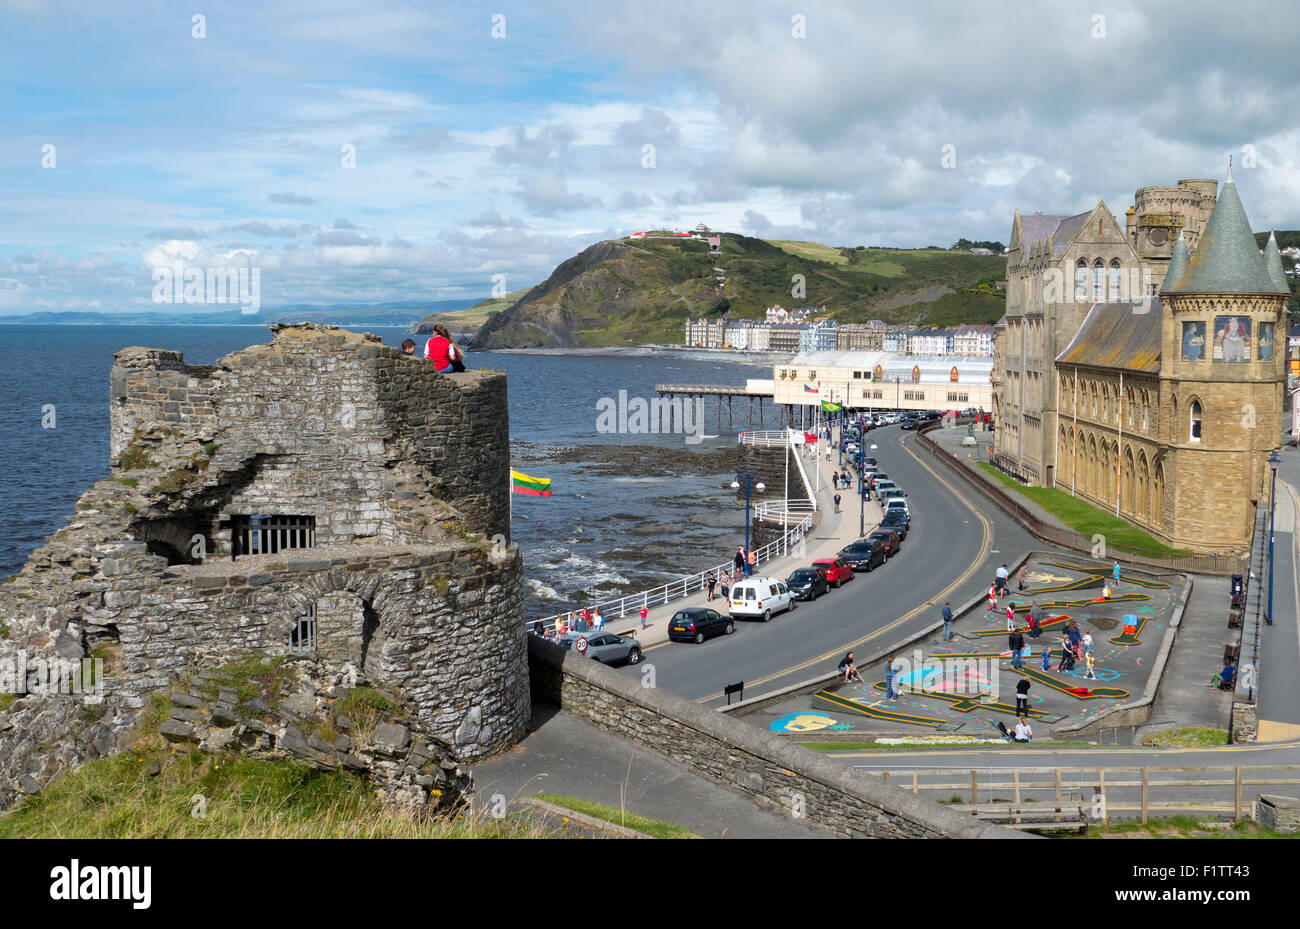 Aberystwyth promenade from the castle, a seaside town in Ceredigion, Wales UK Stock Photo